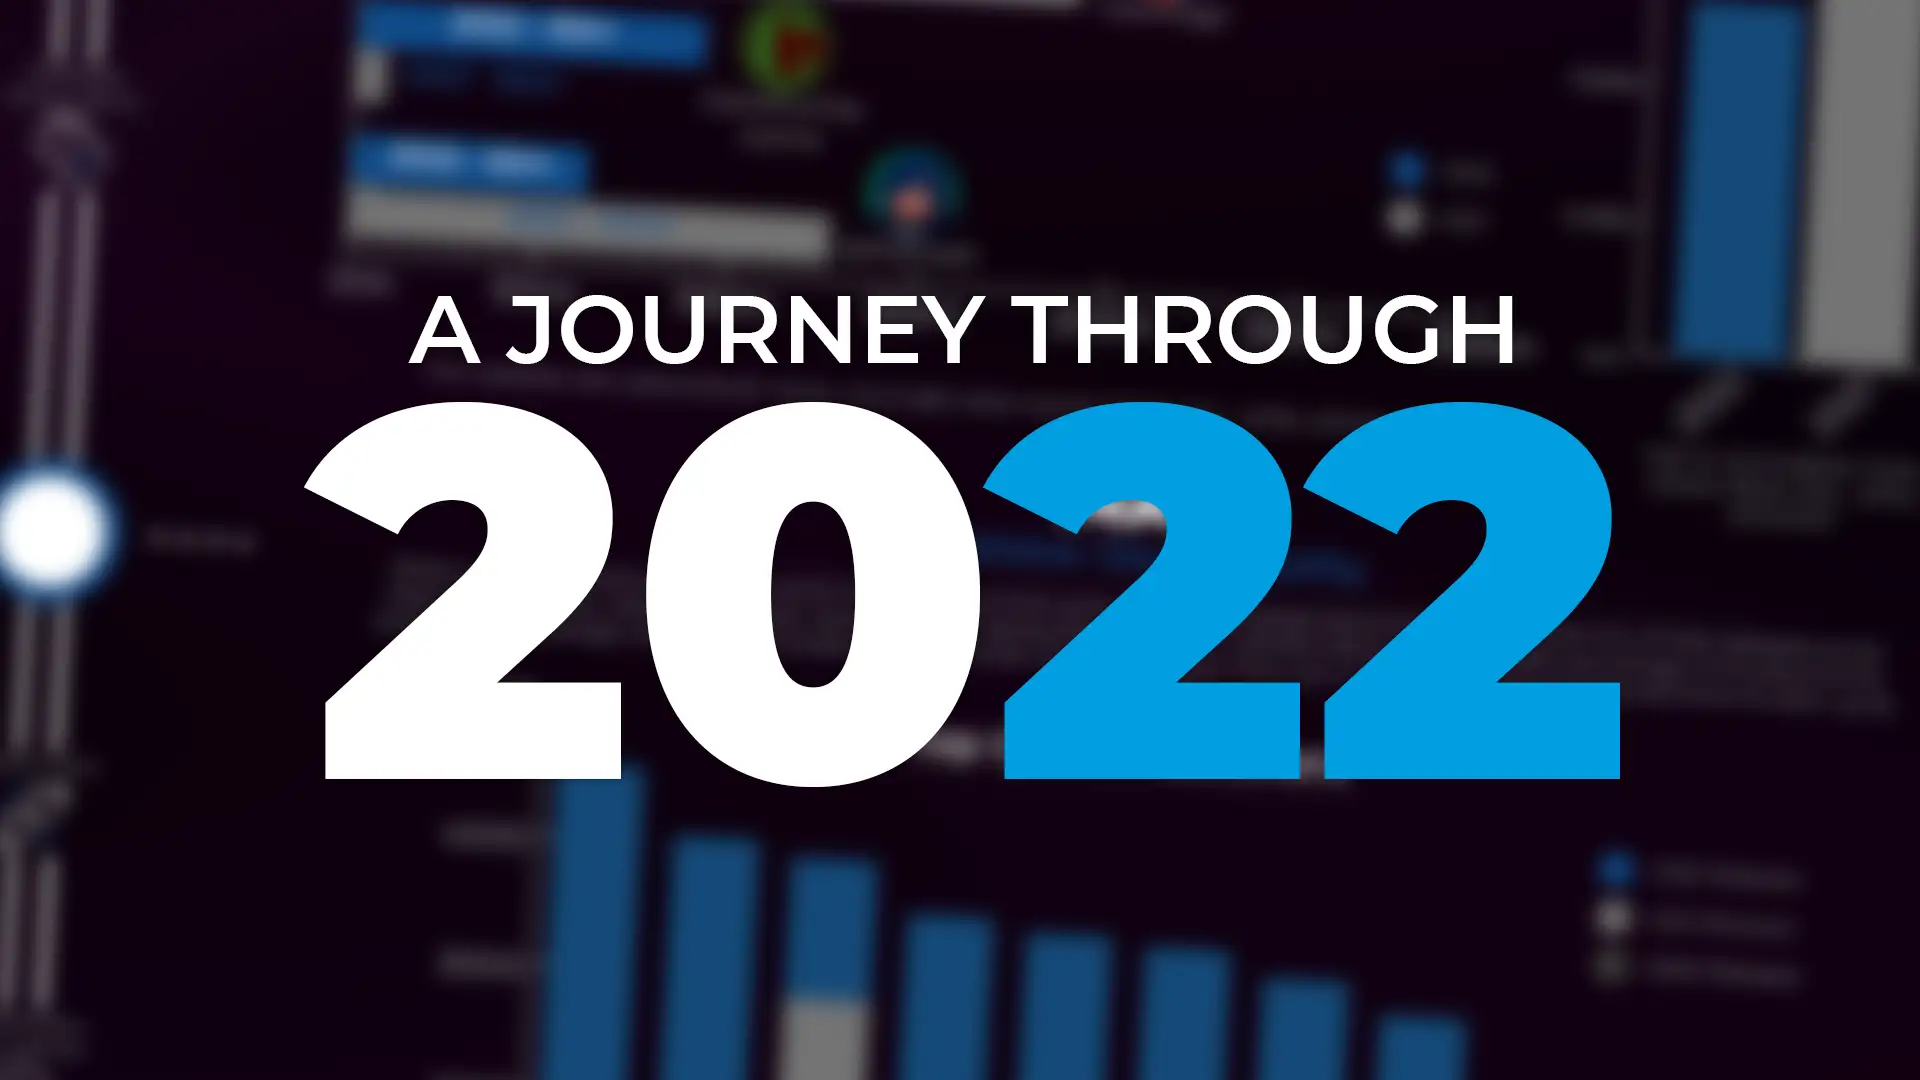 A JOURNEY THROUGH 2022'S KEY MOMENTS